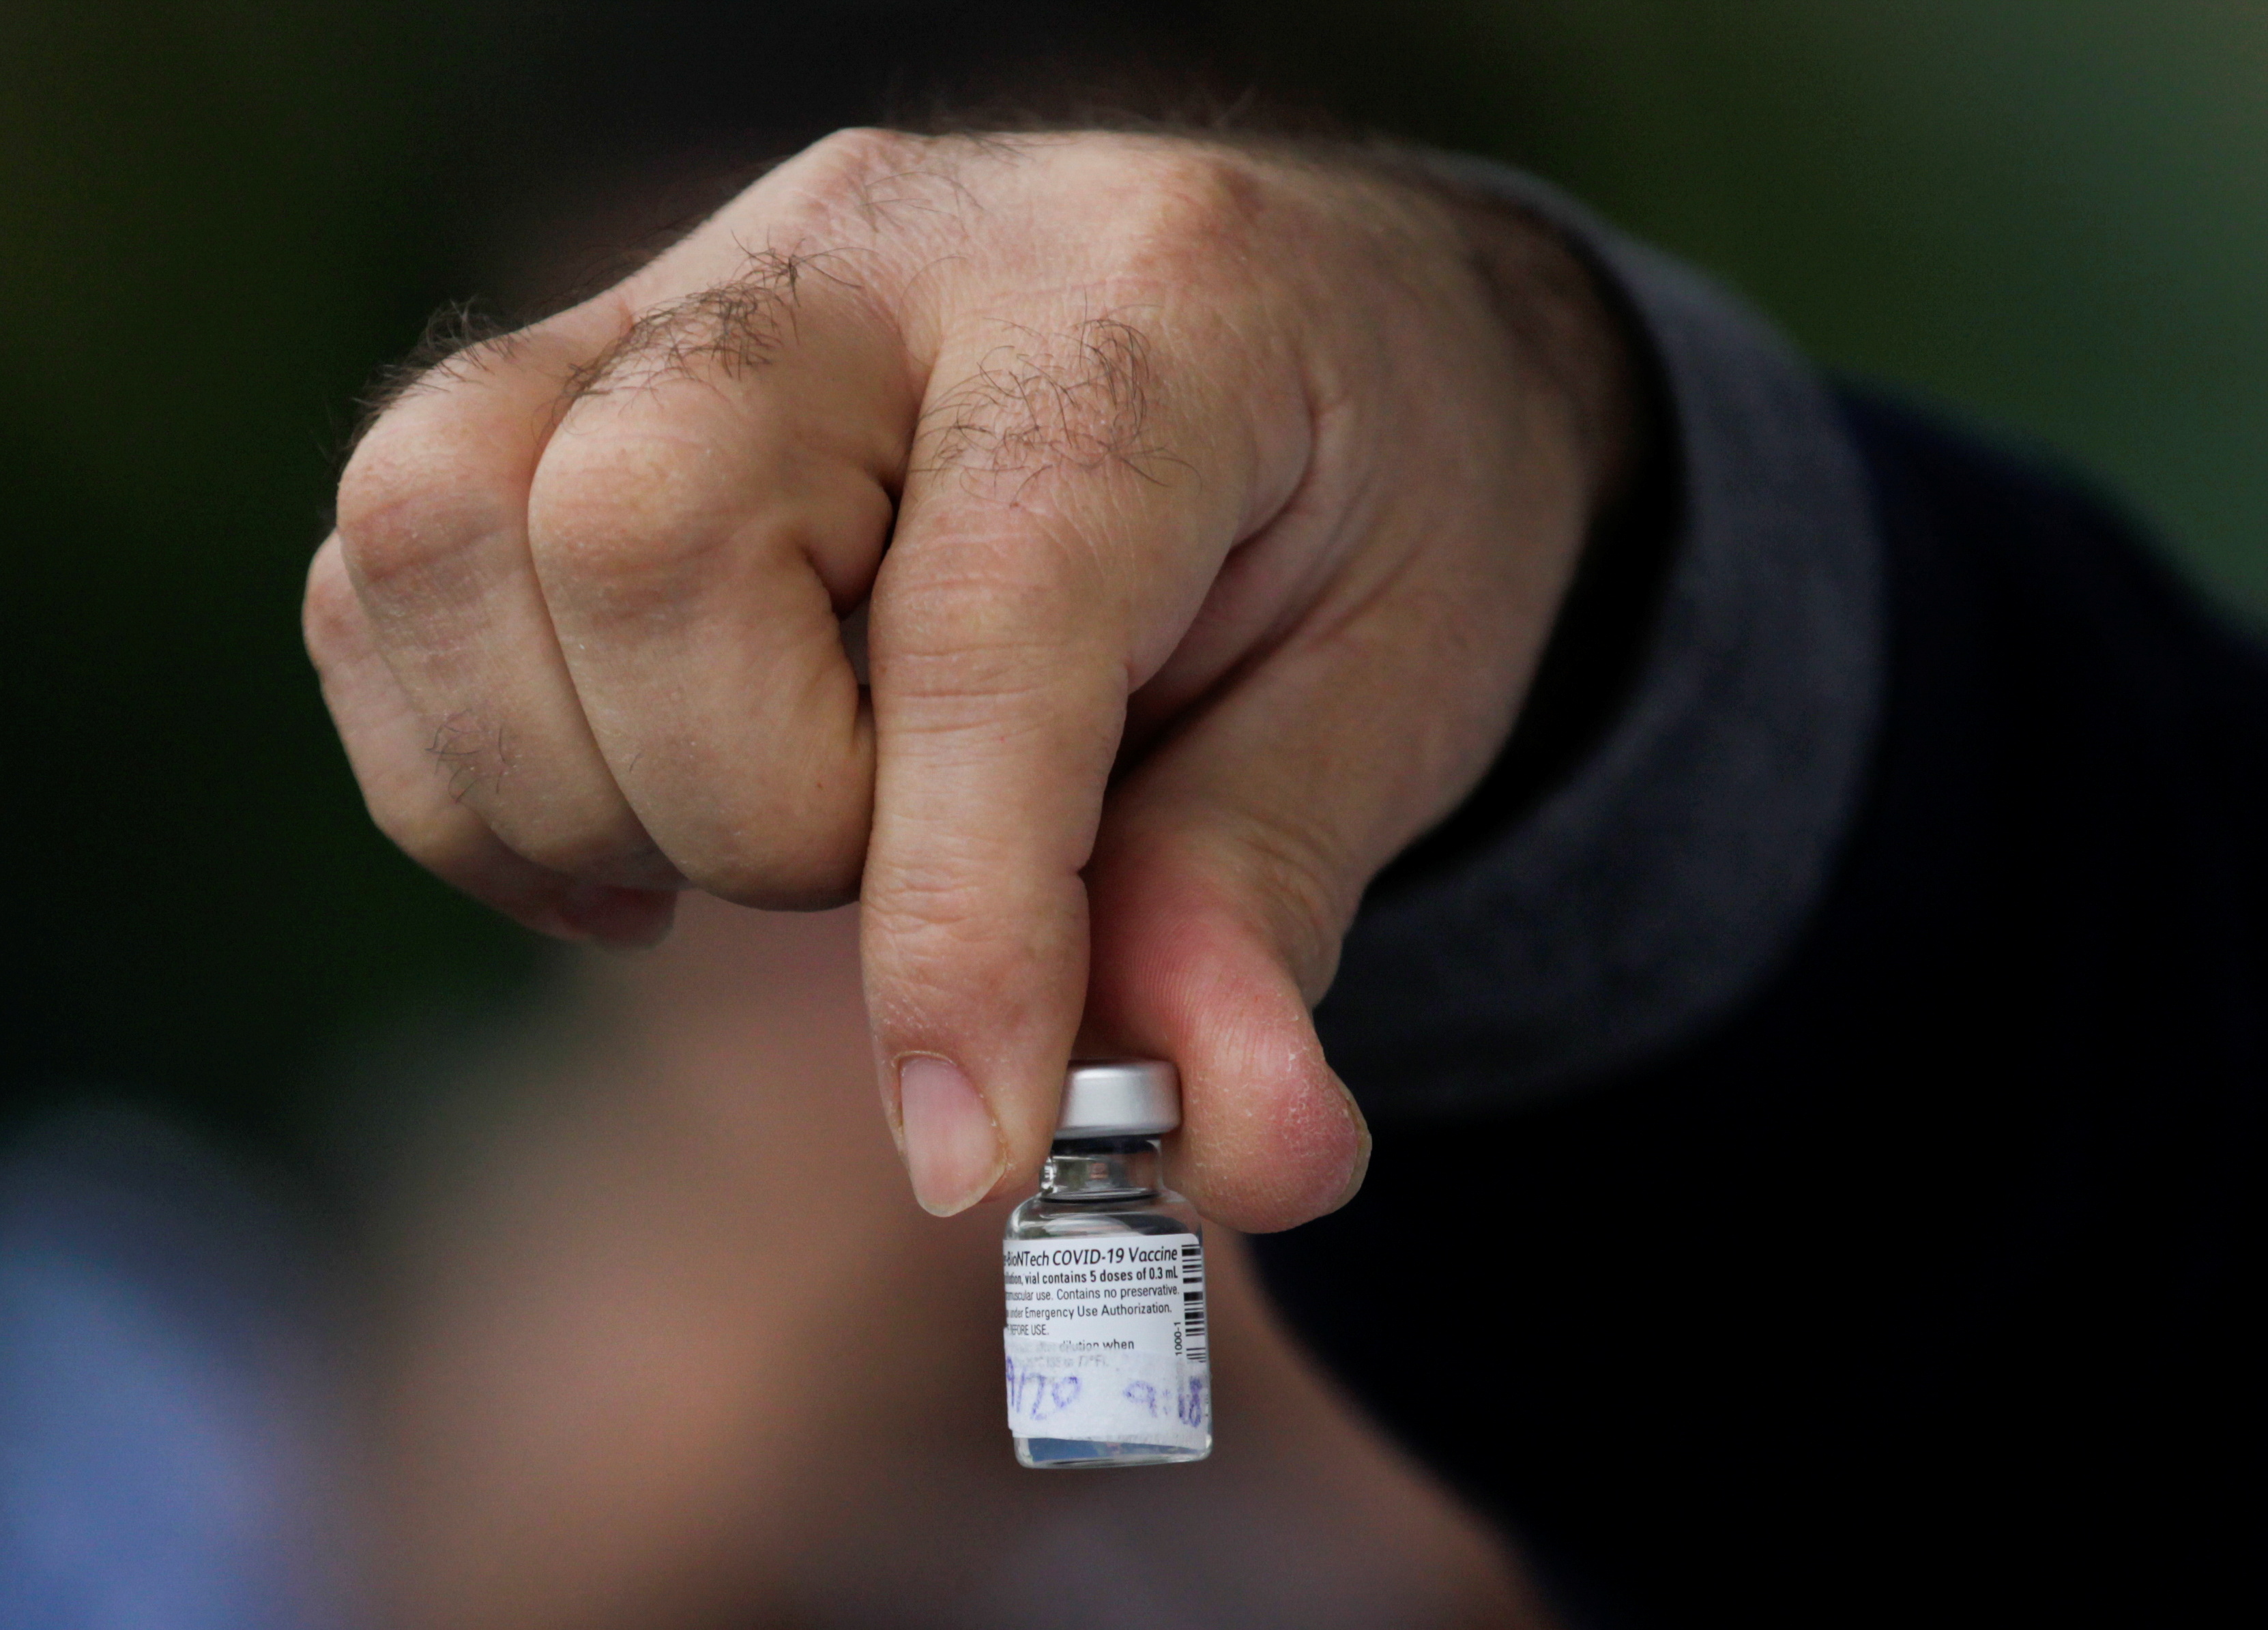 A medical worker shows a dose of the Pfizer-BioNTech COVID-19 vaccine at the Regional Military Specialty Hospital in San Nicolas de los Garza, on the outskirts of Monterrey